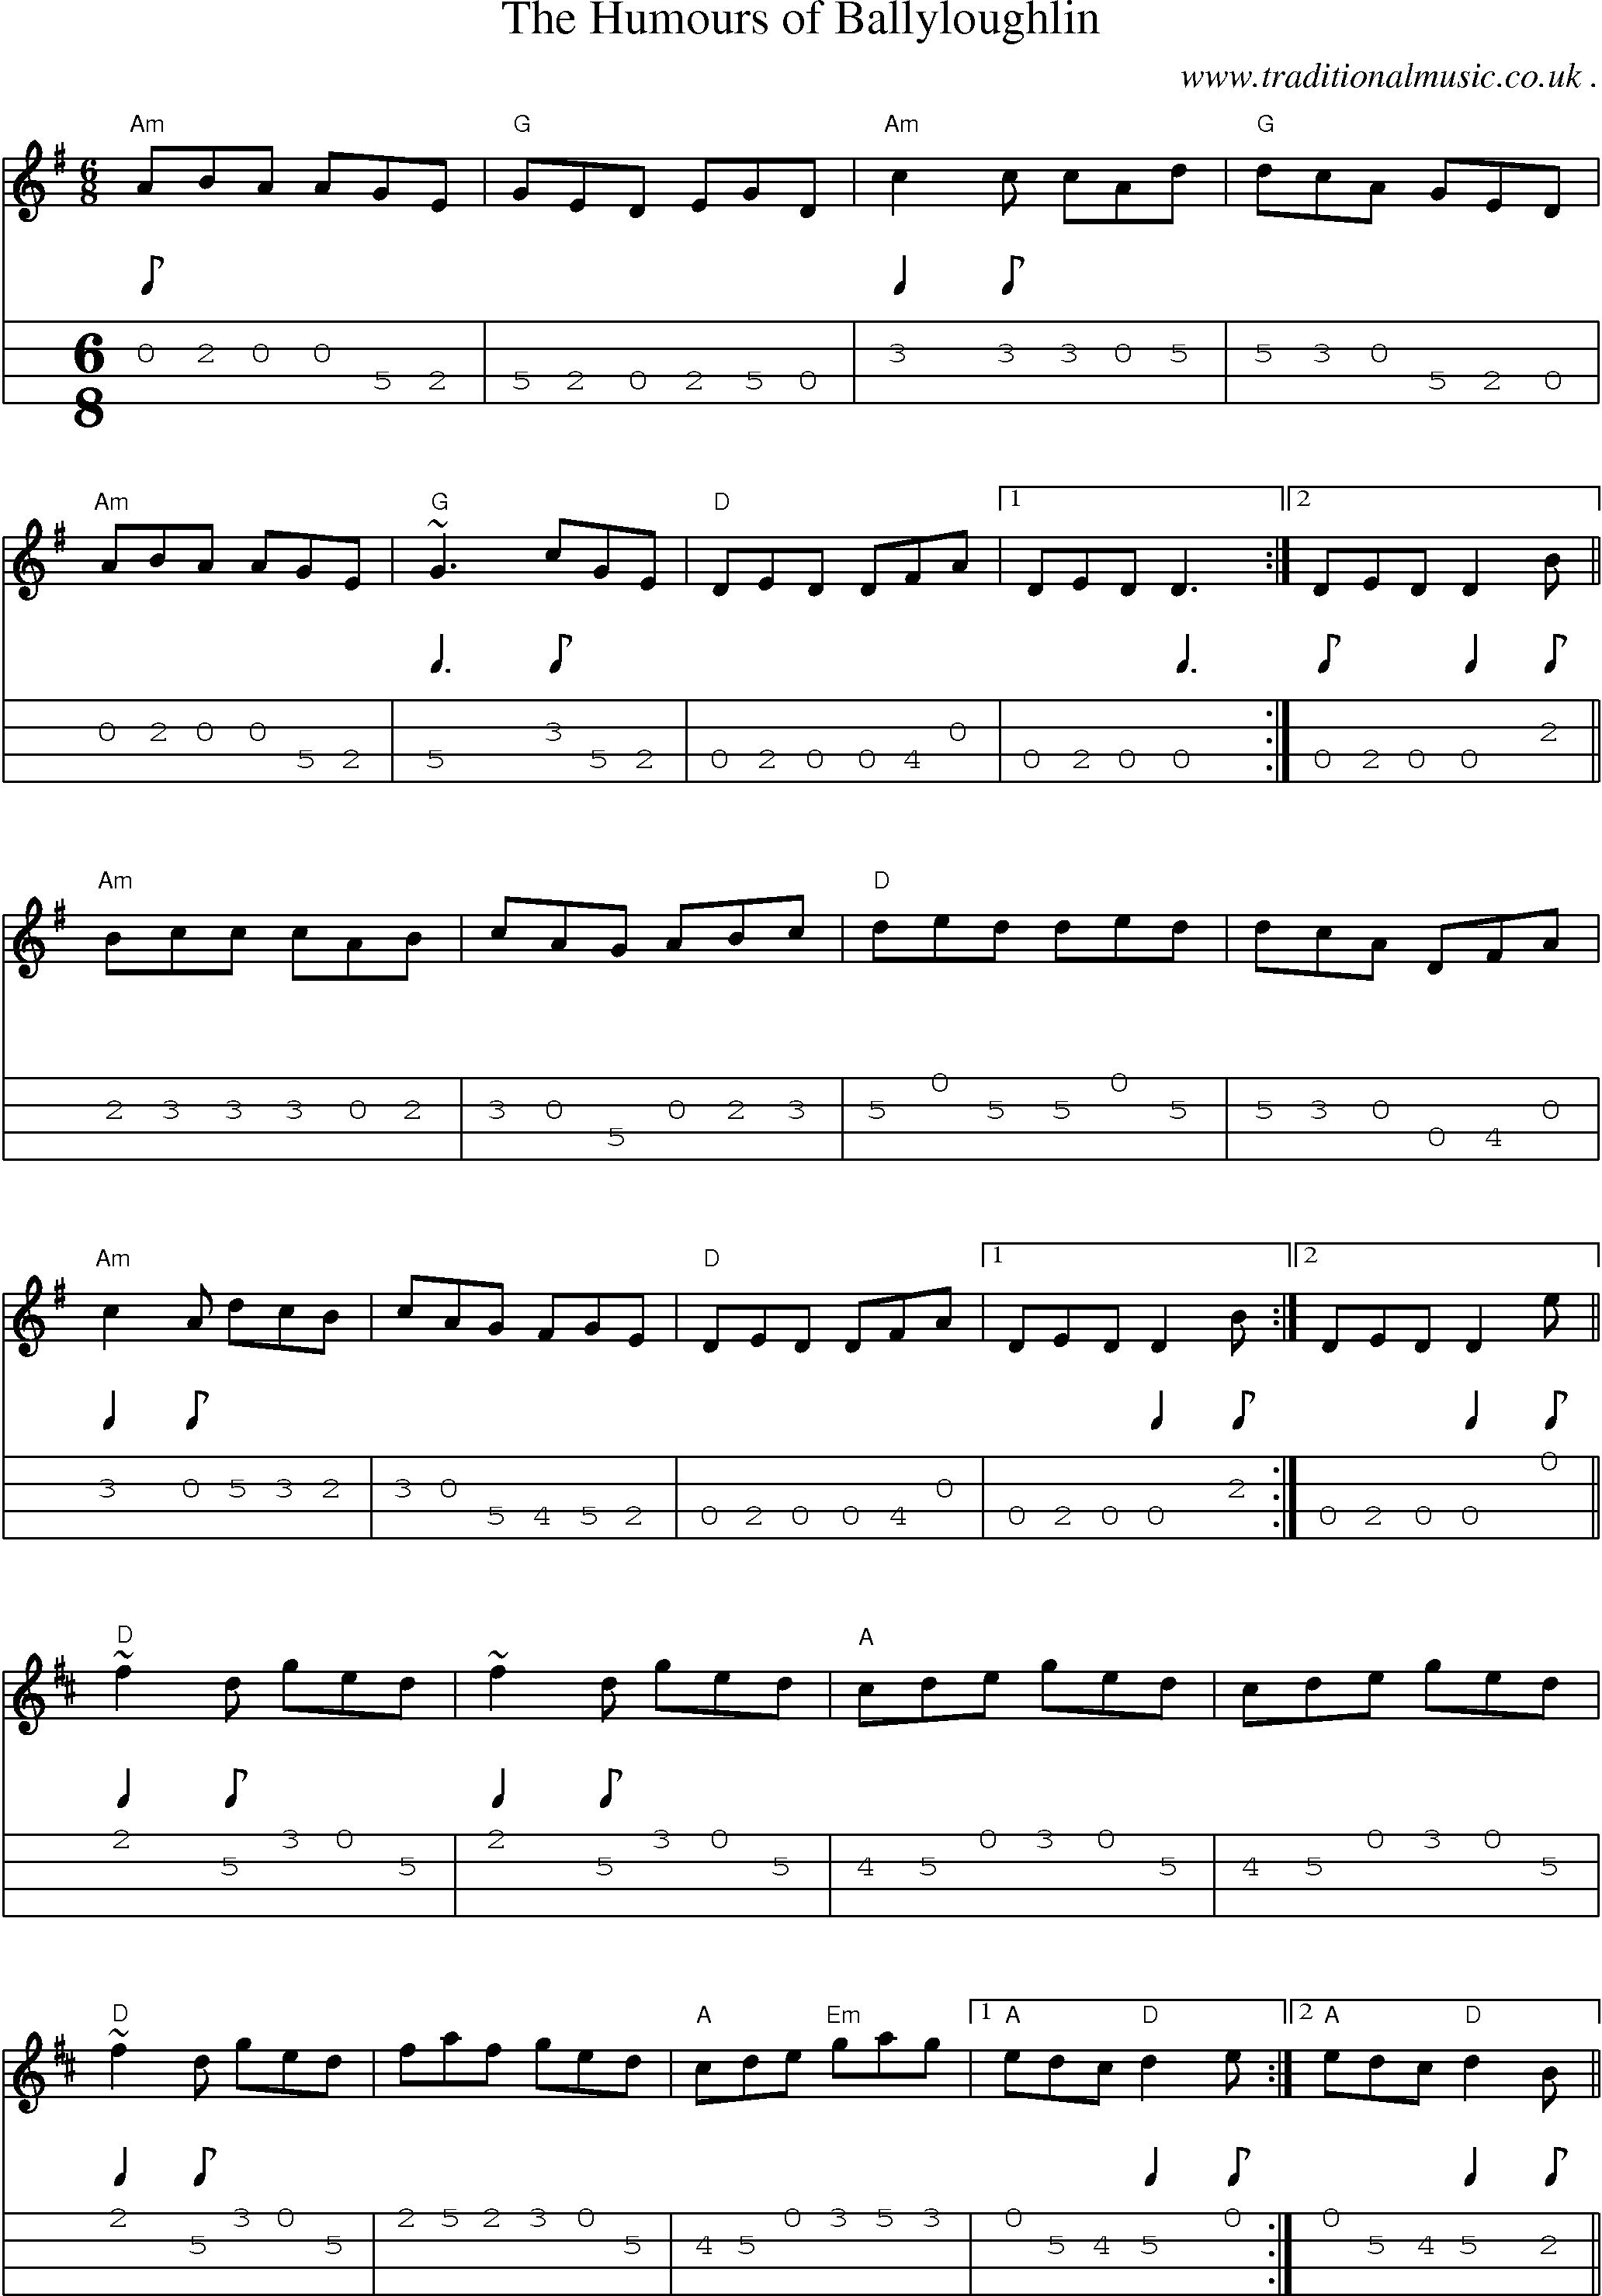 Music Score and Guitar Tabs for The Humours Of Ballyloughlin